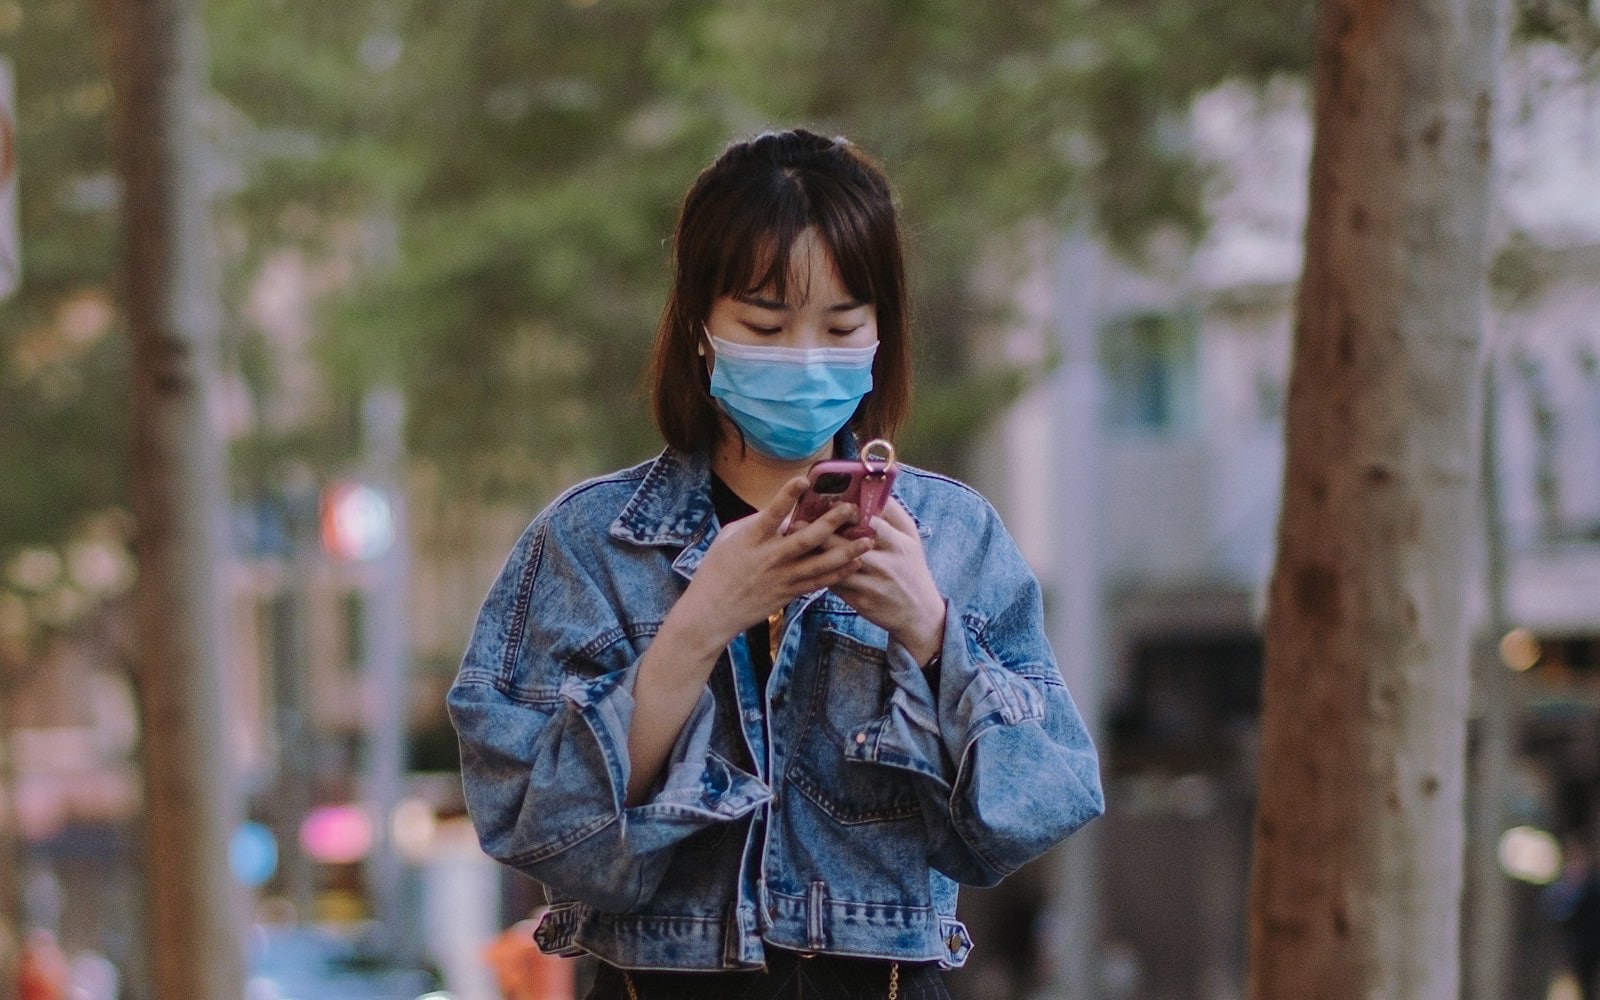 A woman in a face mask uses their phone (Image by Kate Trifo)